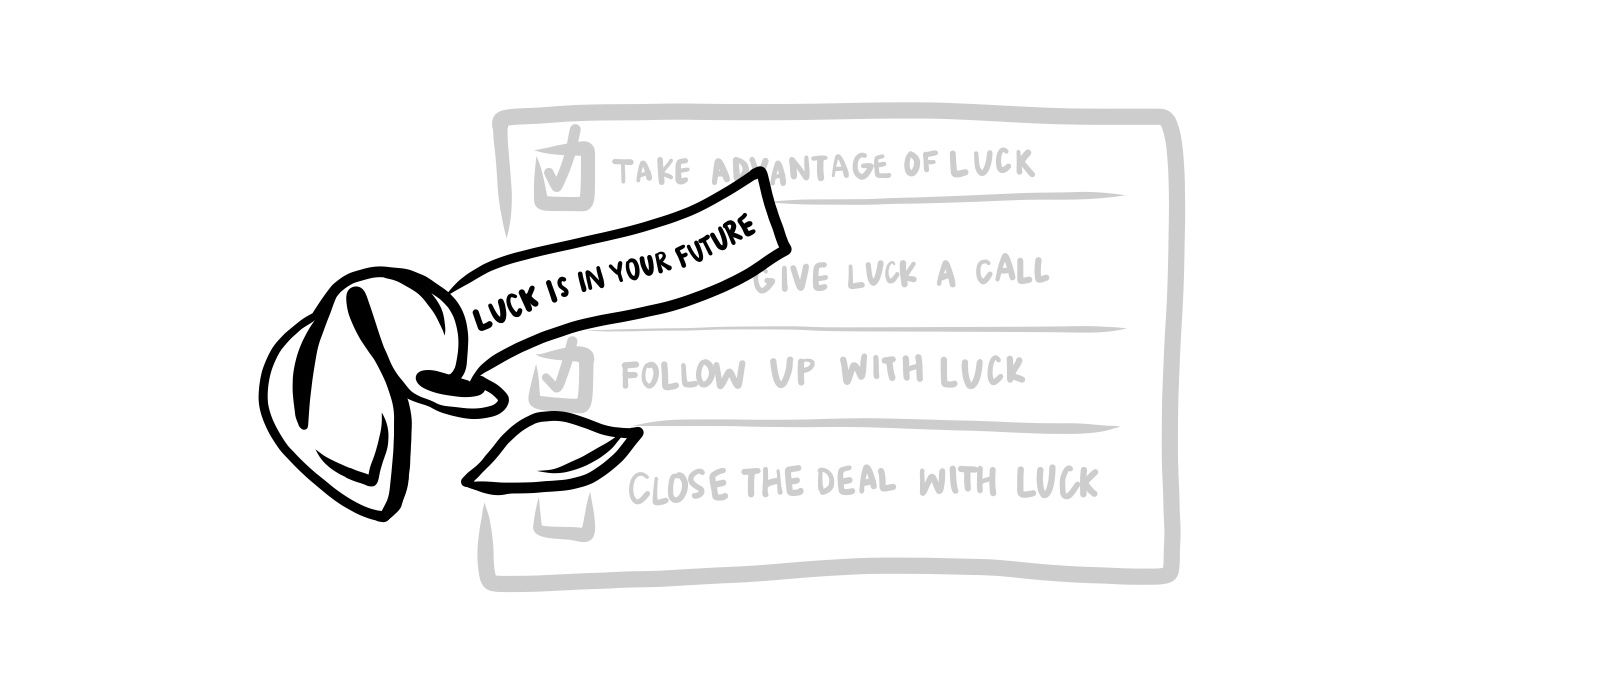 It's what you do with luck that matters.